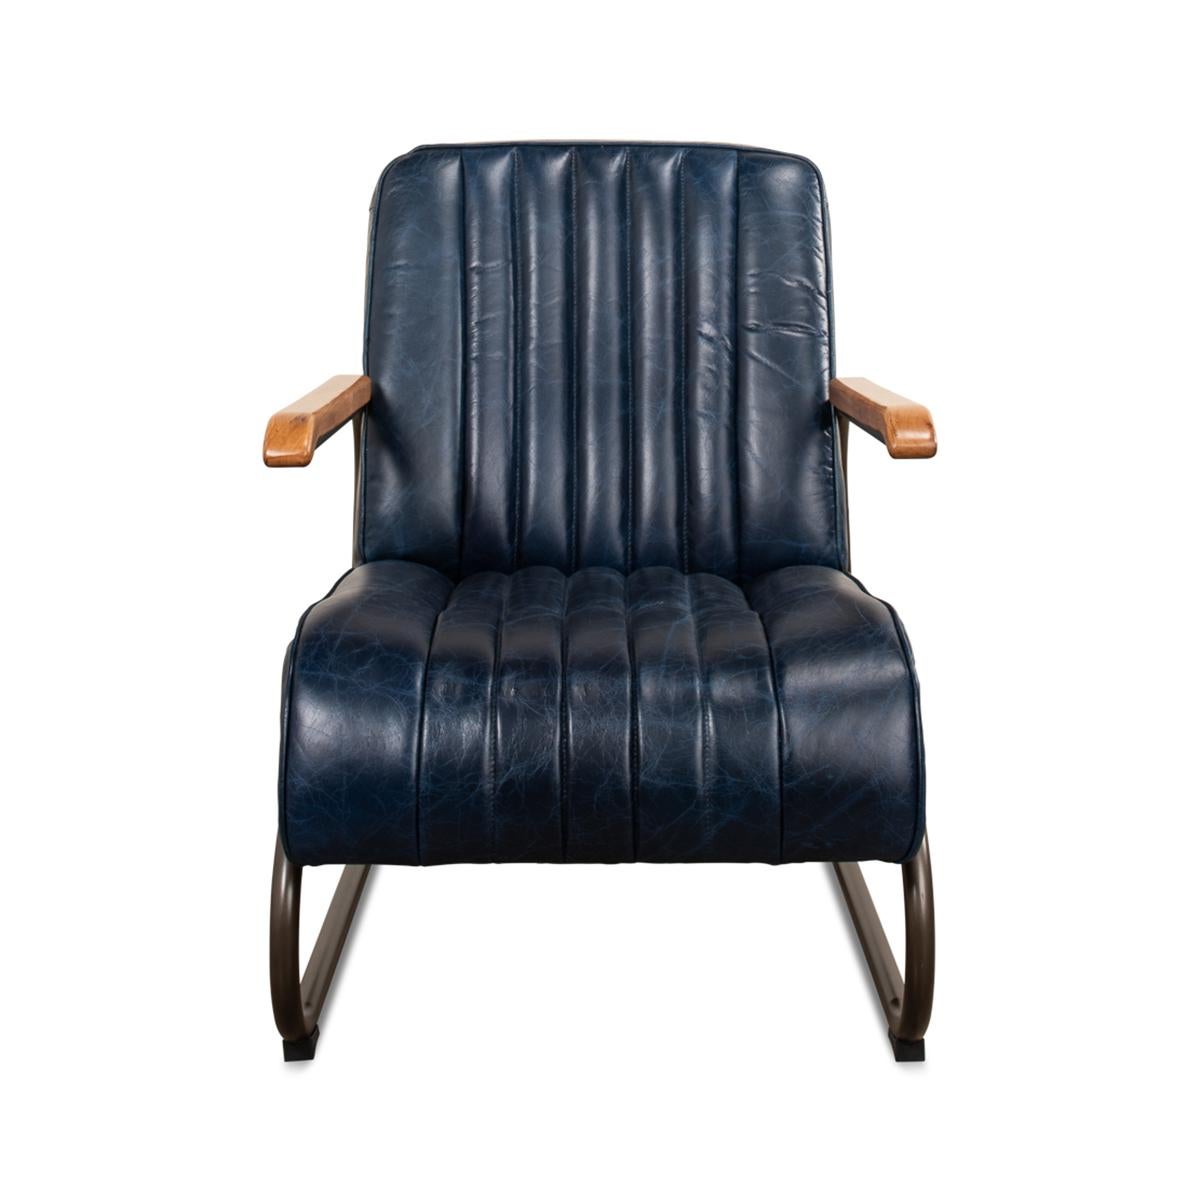 A modern leather armchair with top-grain Chateau Blue vintage leather with chaneled and boxed backrest and seat cushion, jute upholstery to rear and oak armrests supported by a metal industrial frame.

Dimensions: 24